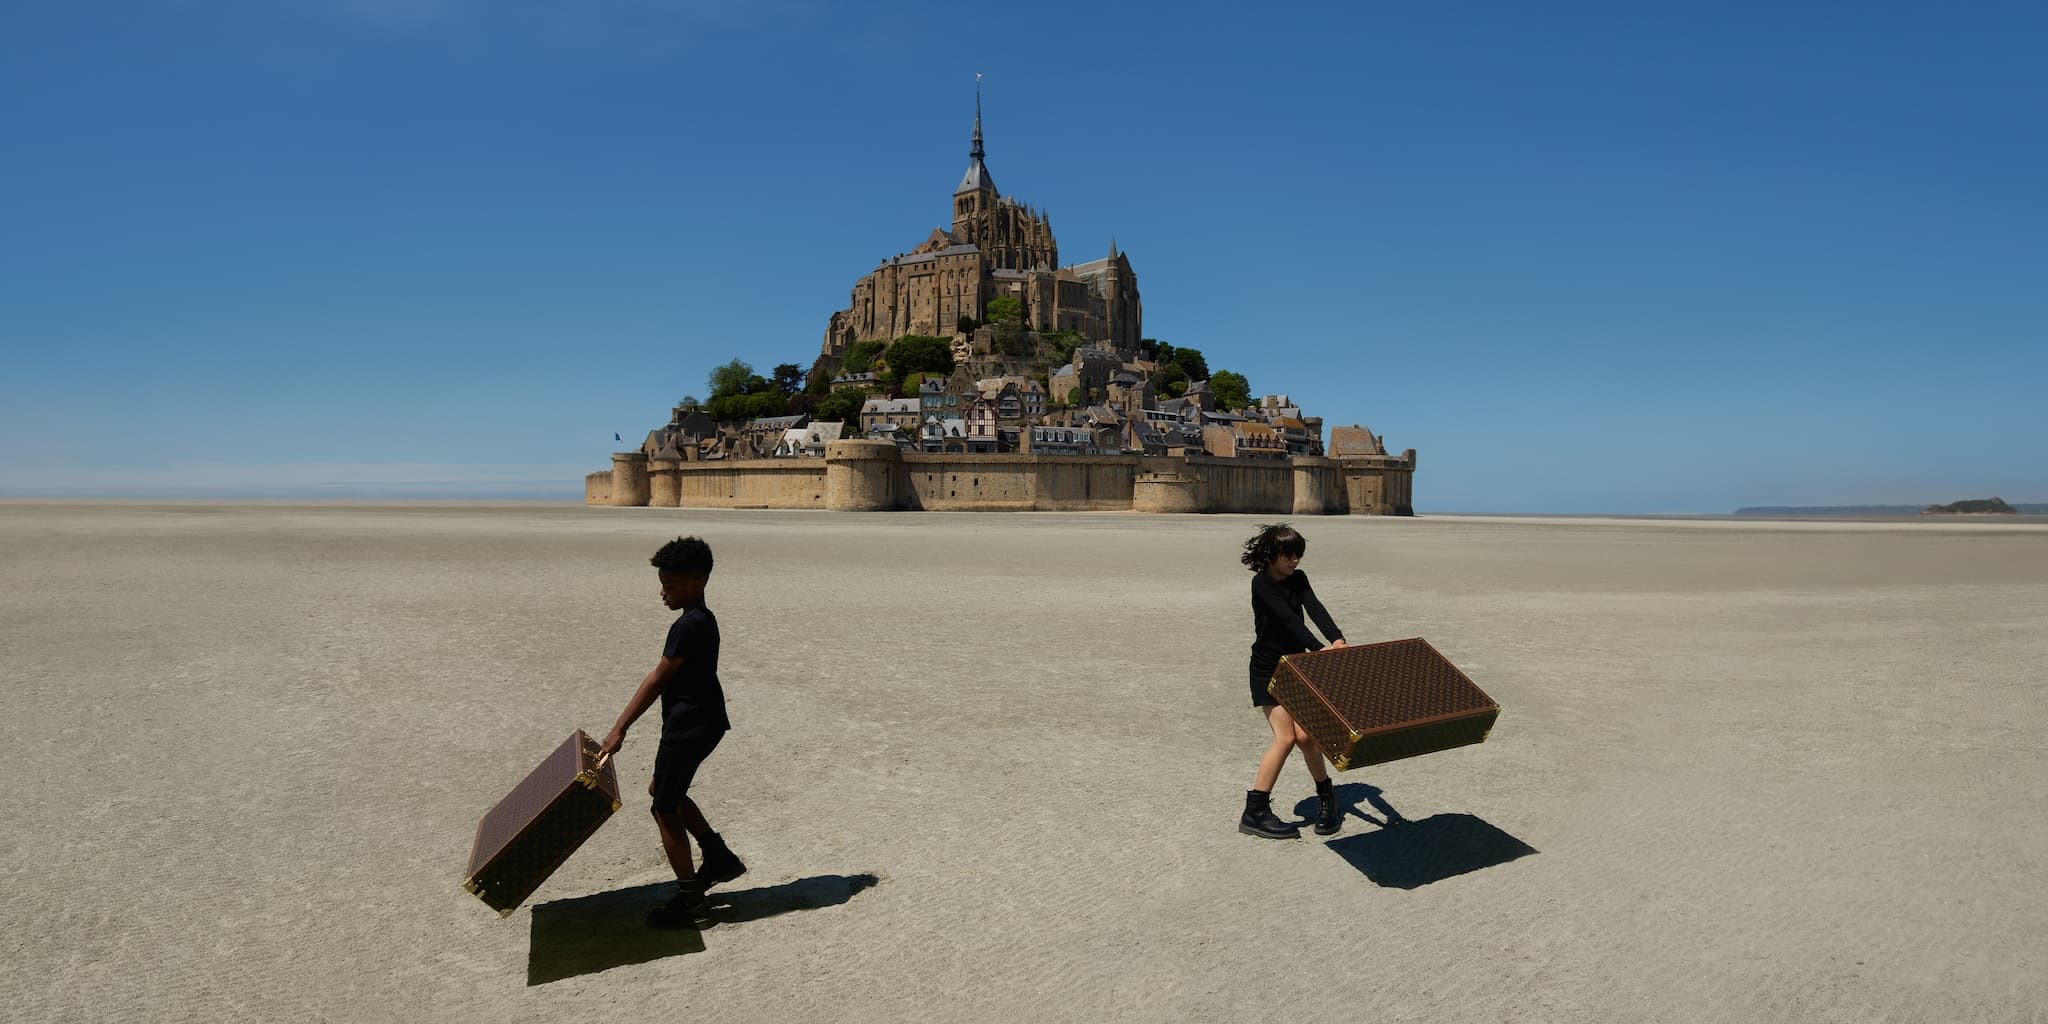 Louis Vuitton The Art of Travel Ad Campaign